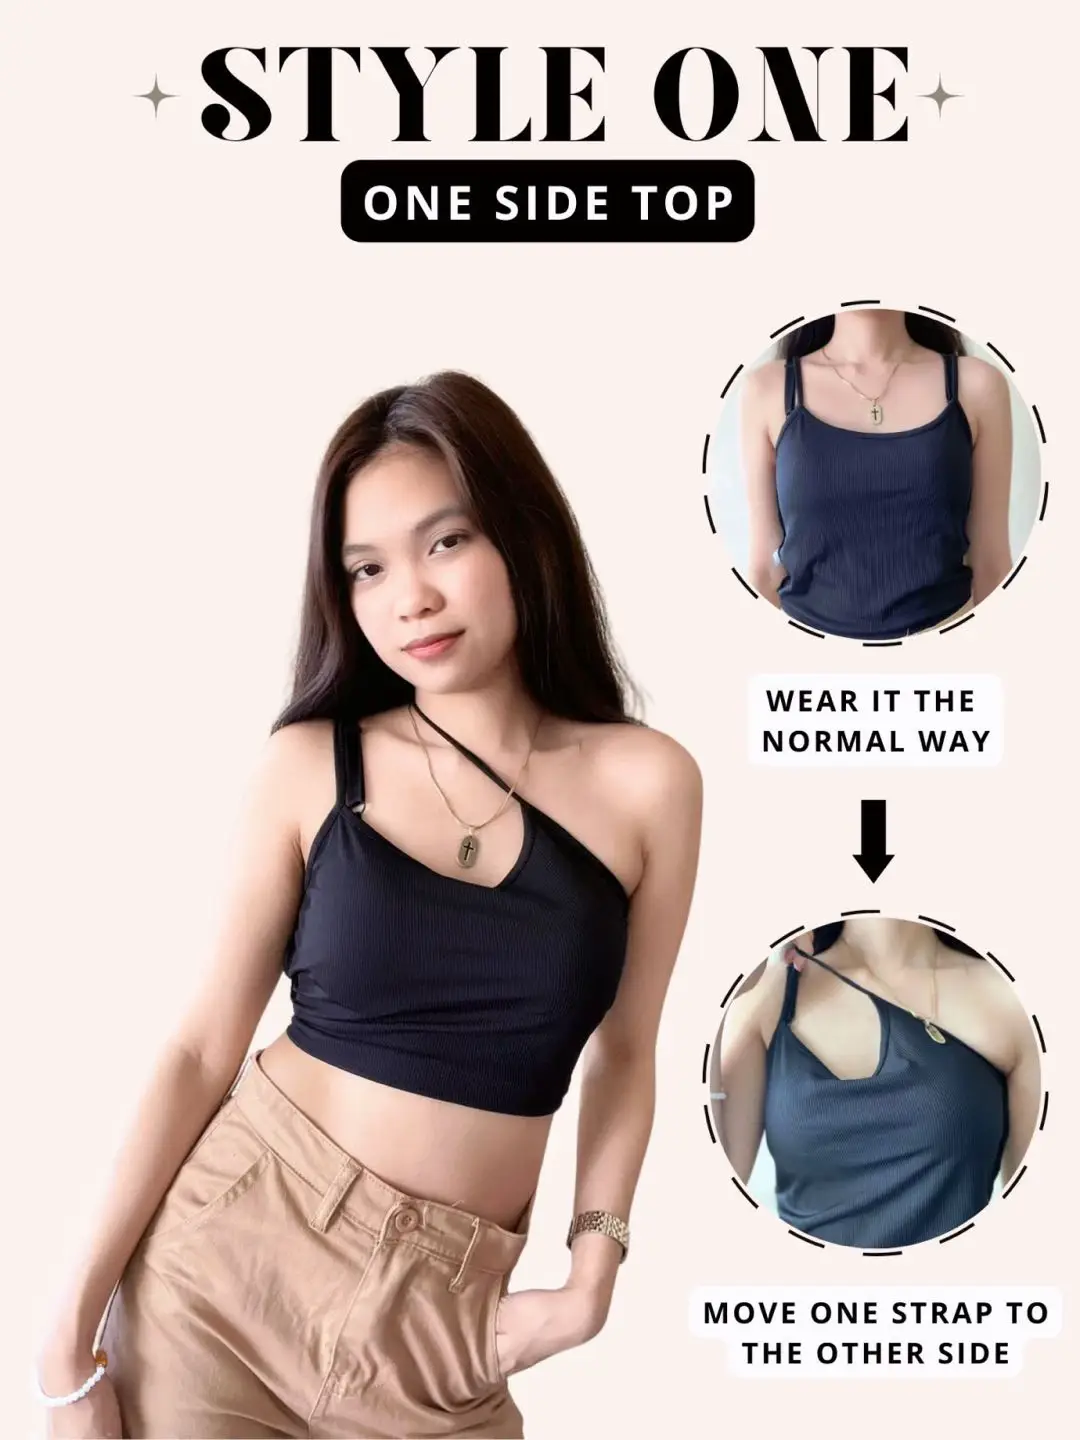 Wearing a one shoulder top or dress & need to hide your bra strap?!🙌